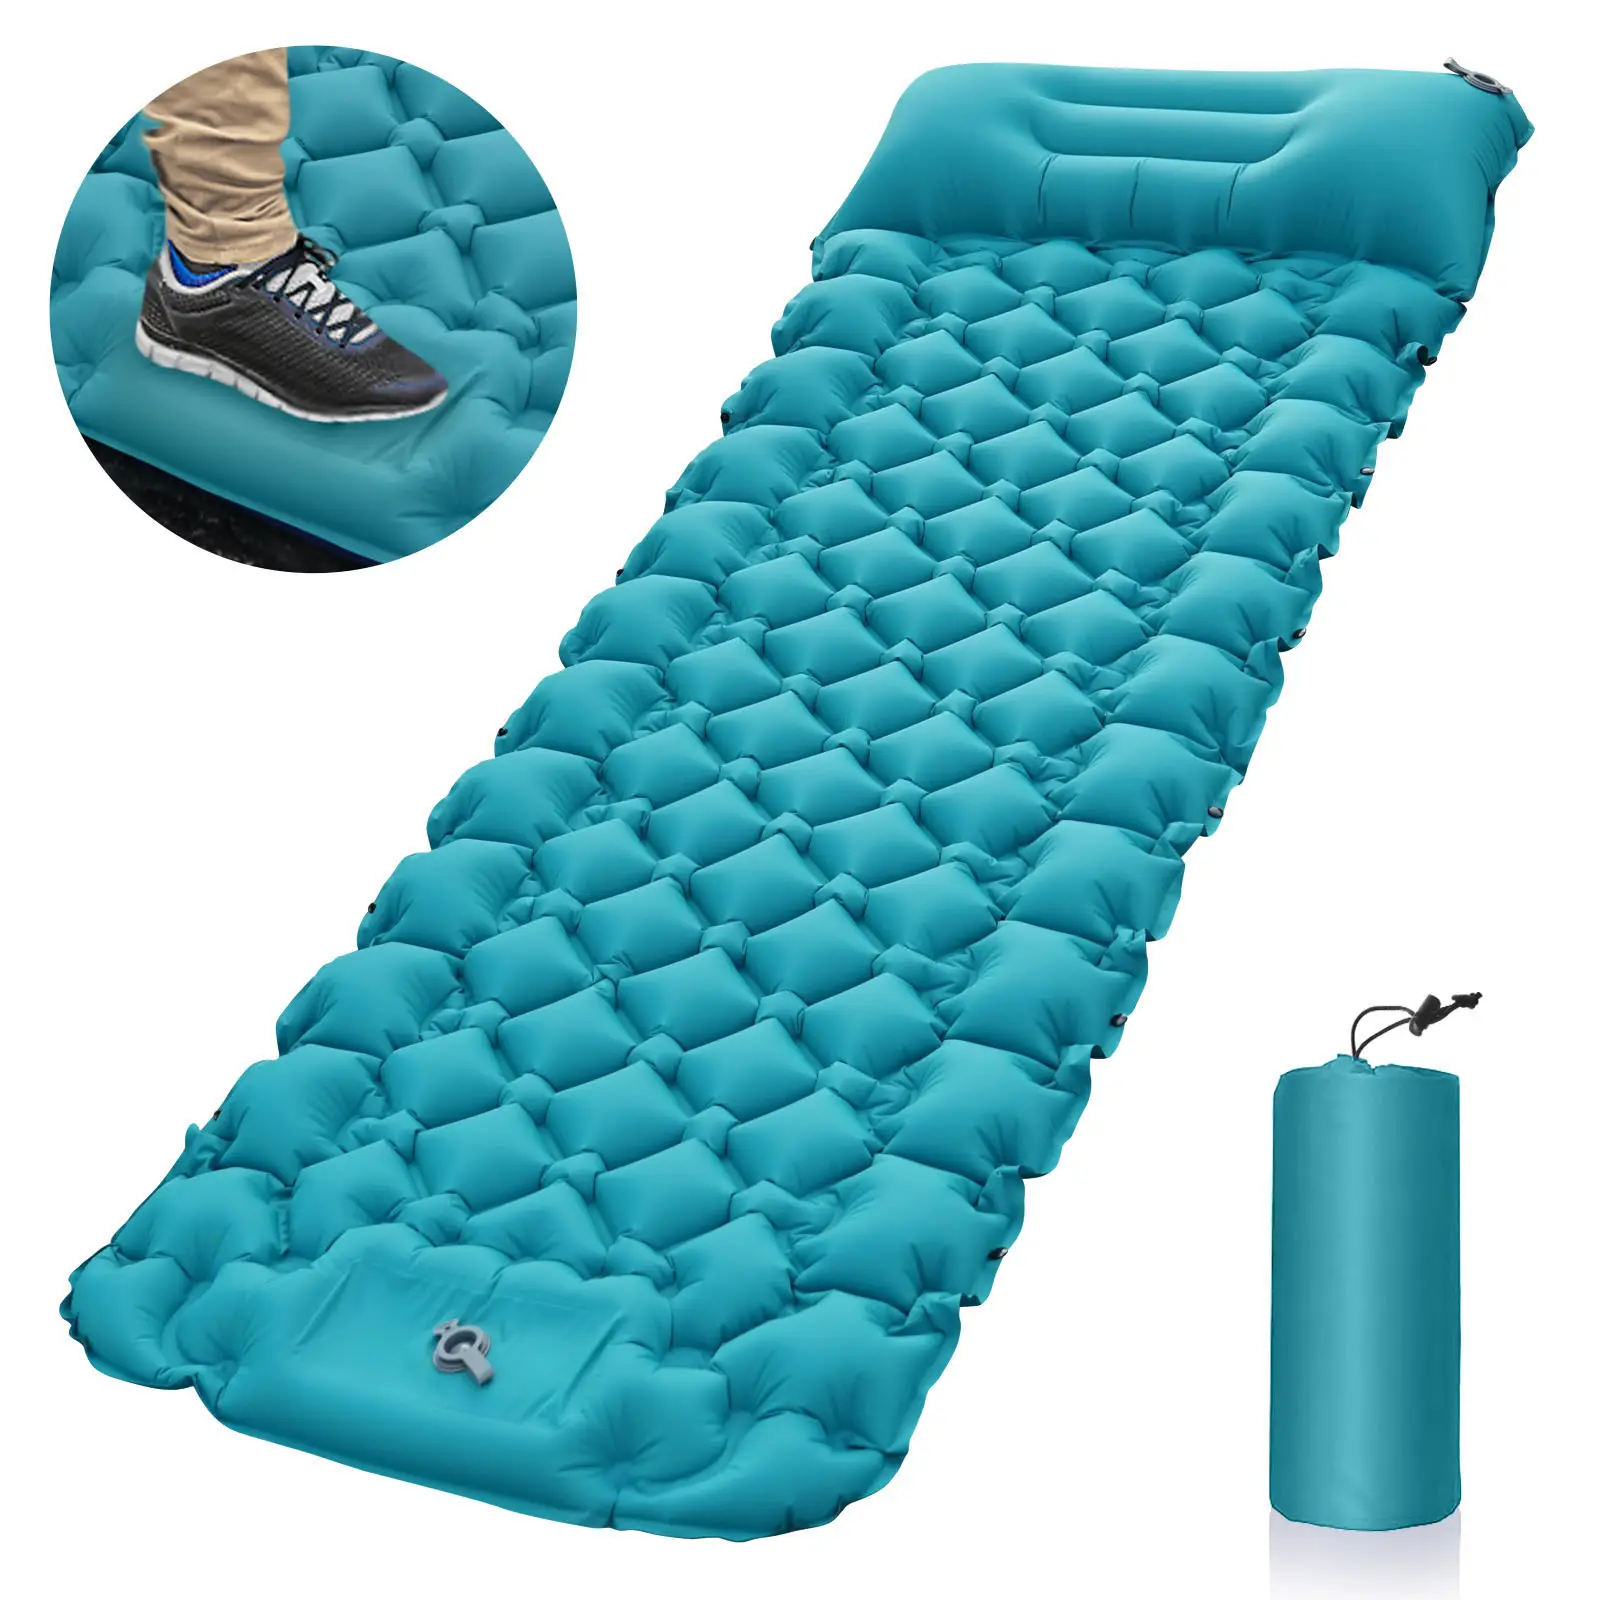 Waterproof Wholesale Air Mattress Built-in Pump Inflatable Air Bed Compact Ultralight Waterproof Camping Mat With Pillow